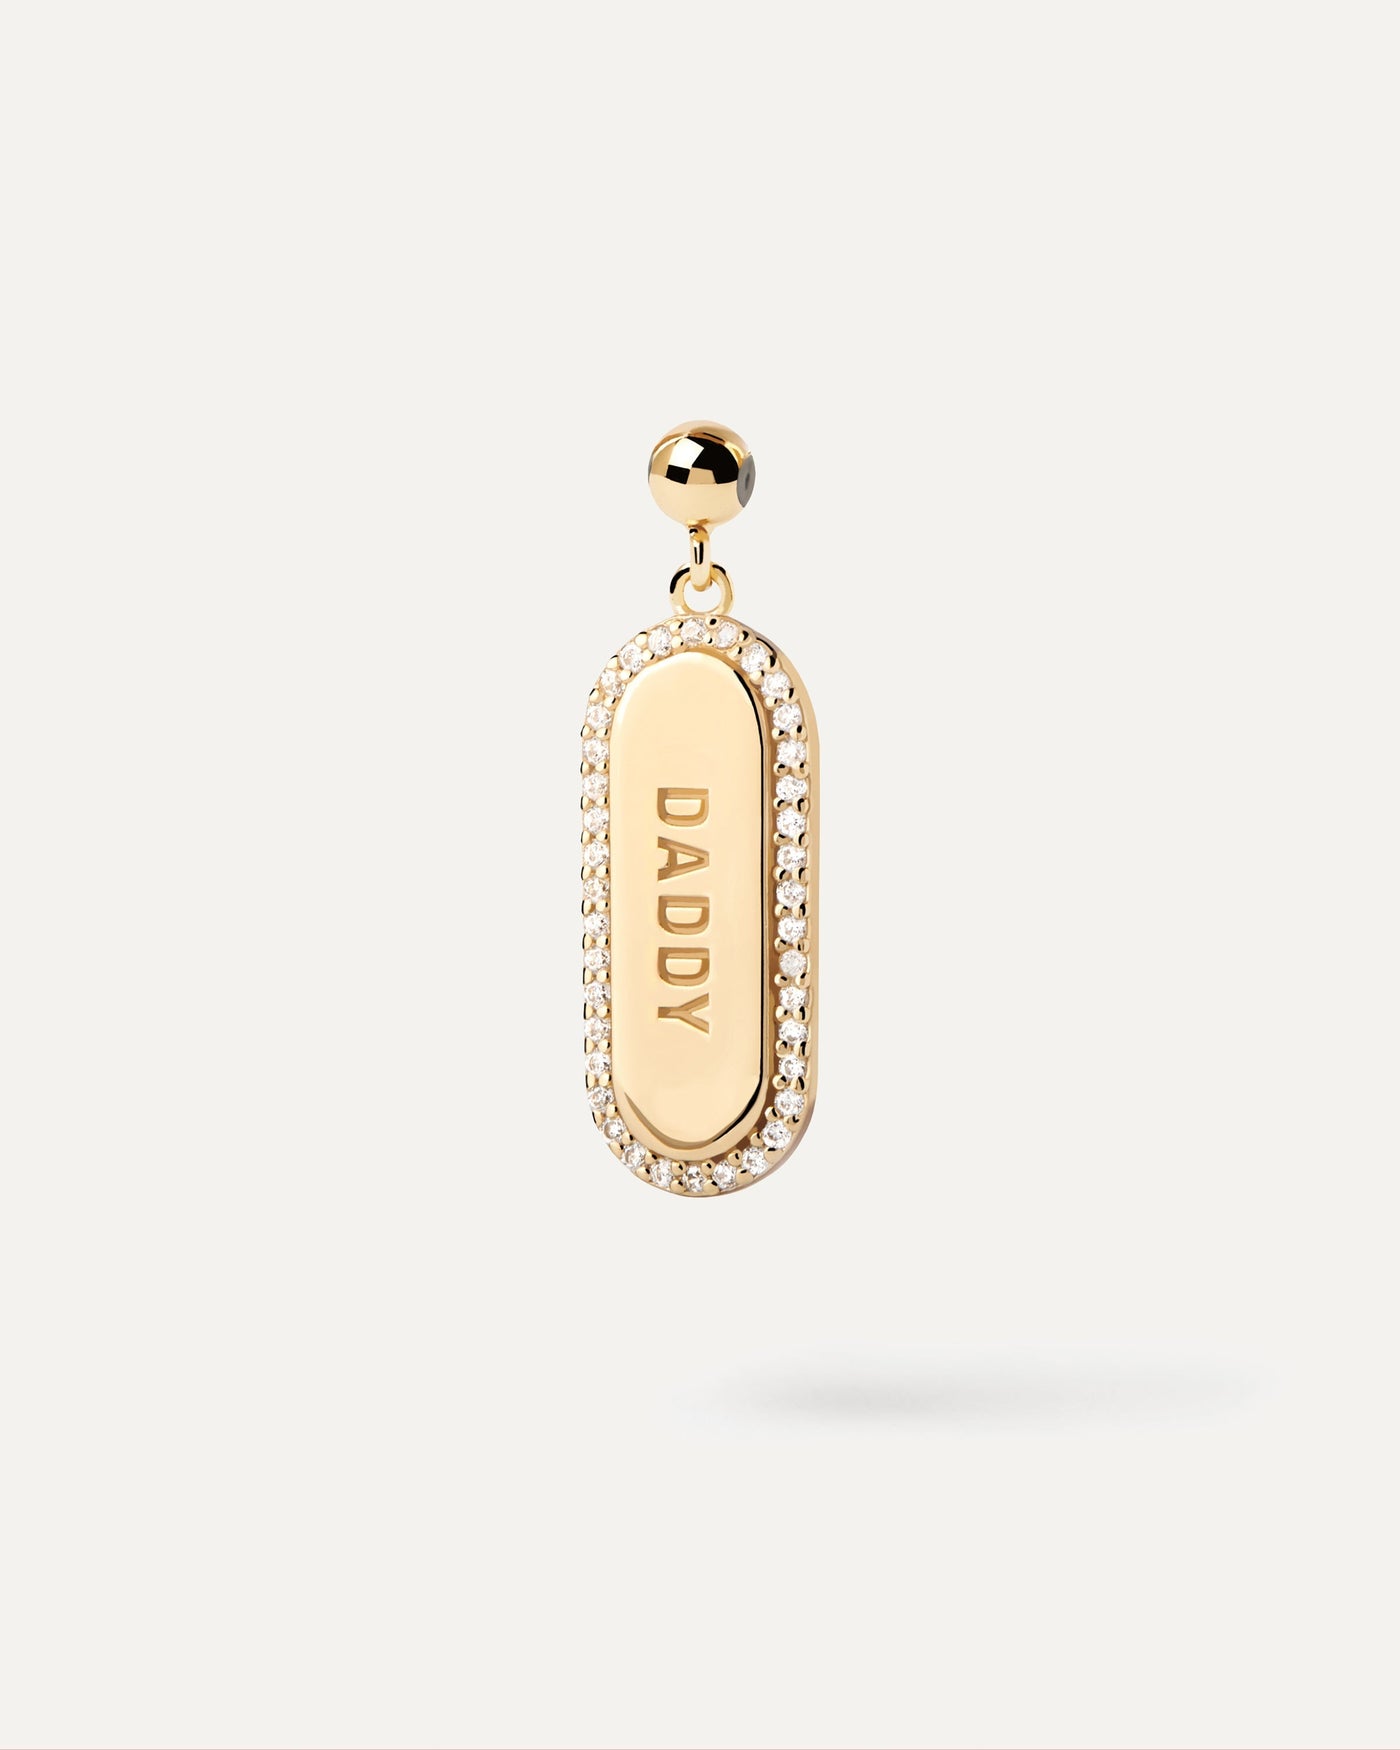 2023 Selection | Daddy Sparkly Charm. Get the latest arrival from PDPAOLA. Place your order safely and get this Best Seller. Free Shipping.